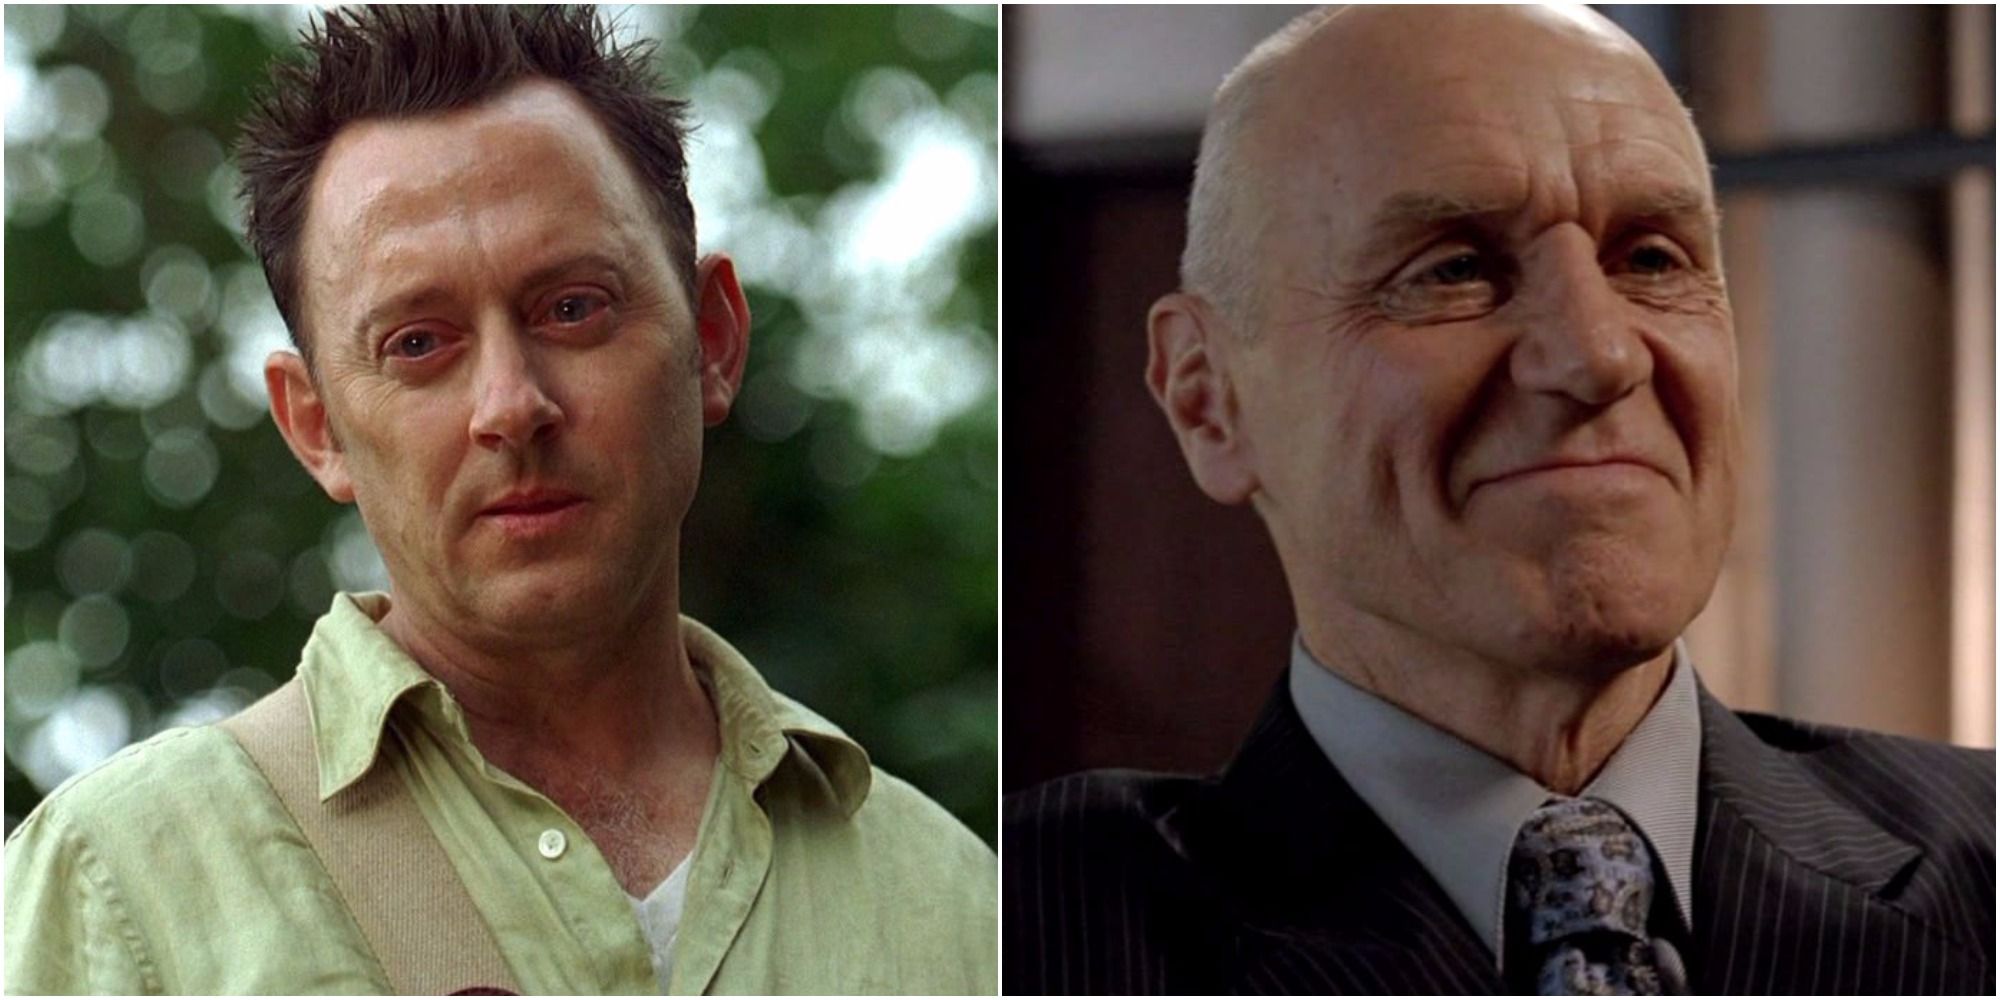 On Lost Ben Linus and Charles Widmore had Rules that were never explained.